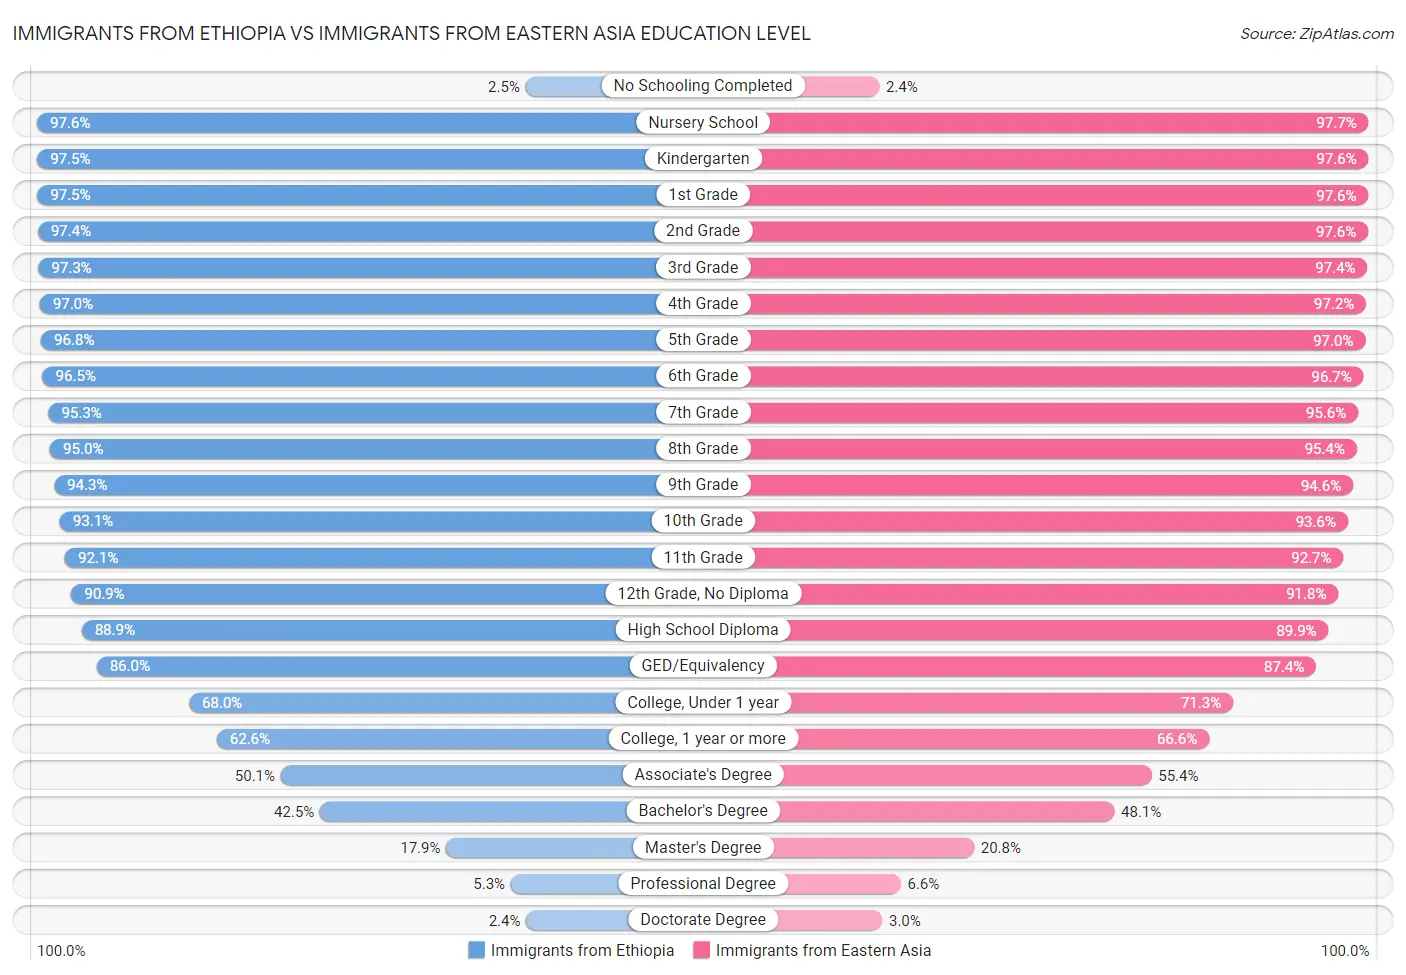 Immigrants from Ethiopia vs Immigrants from Eastern Asia Education Level